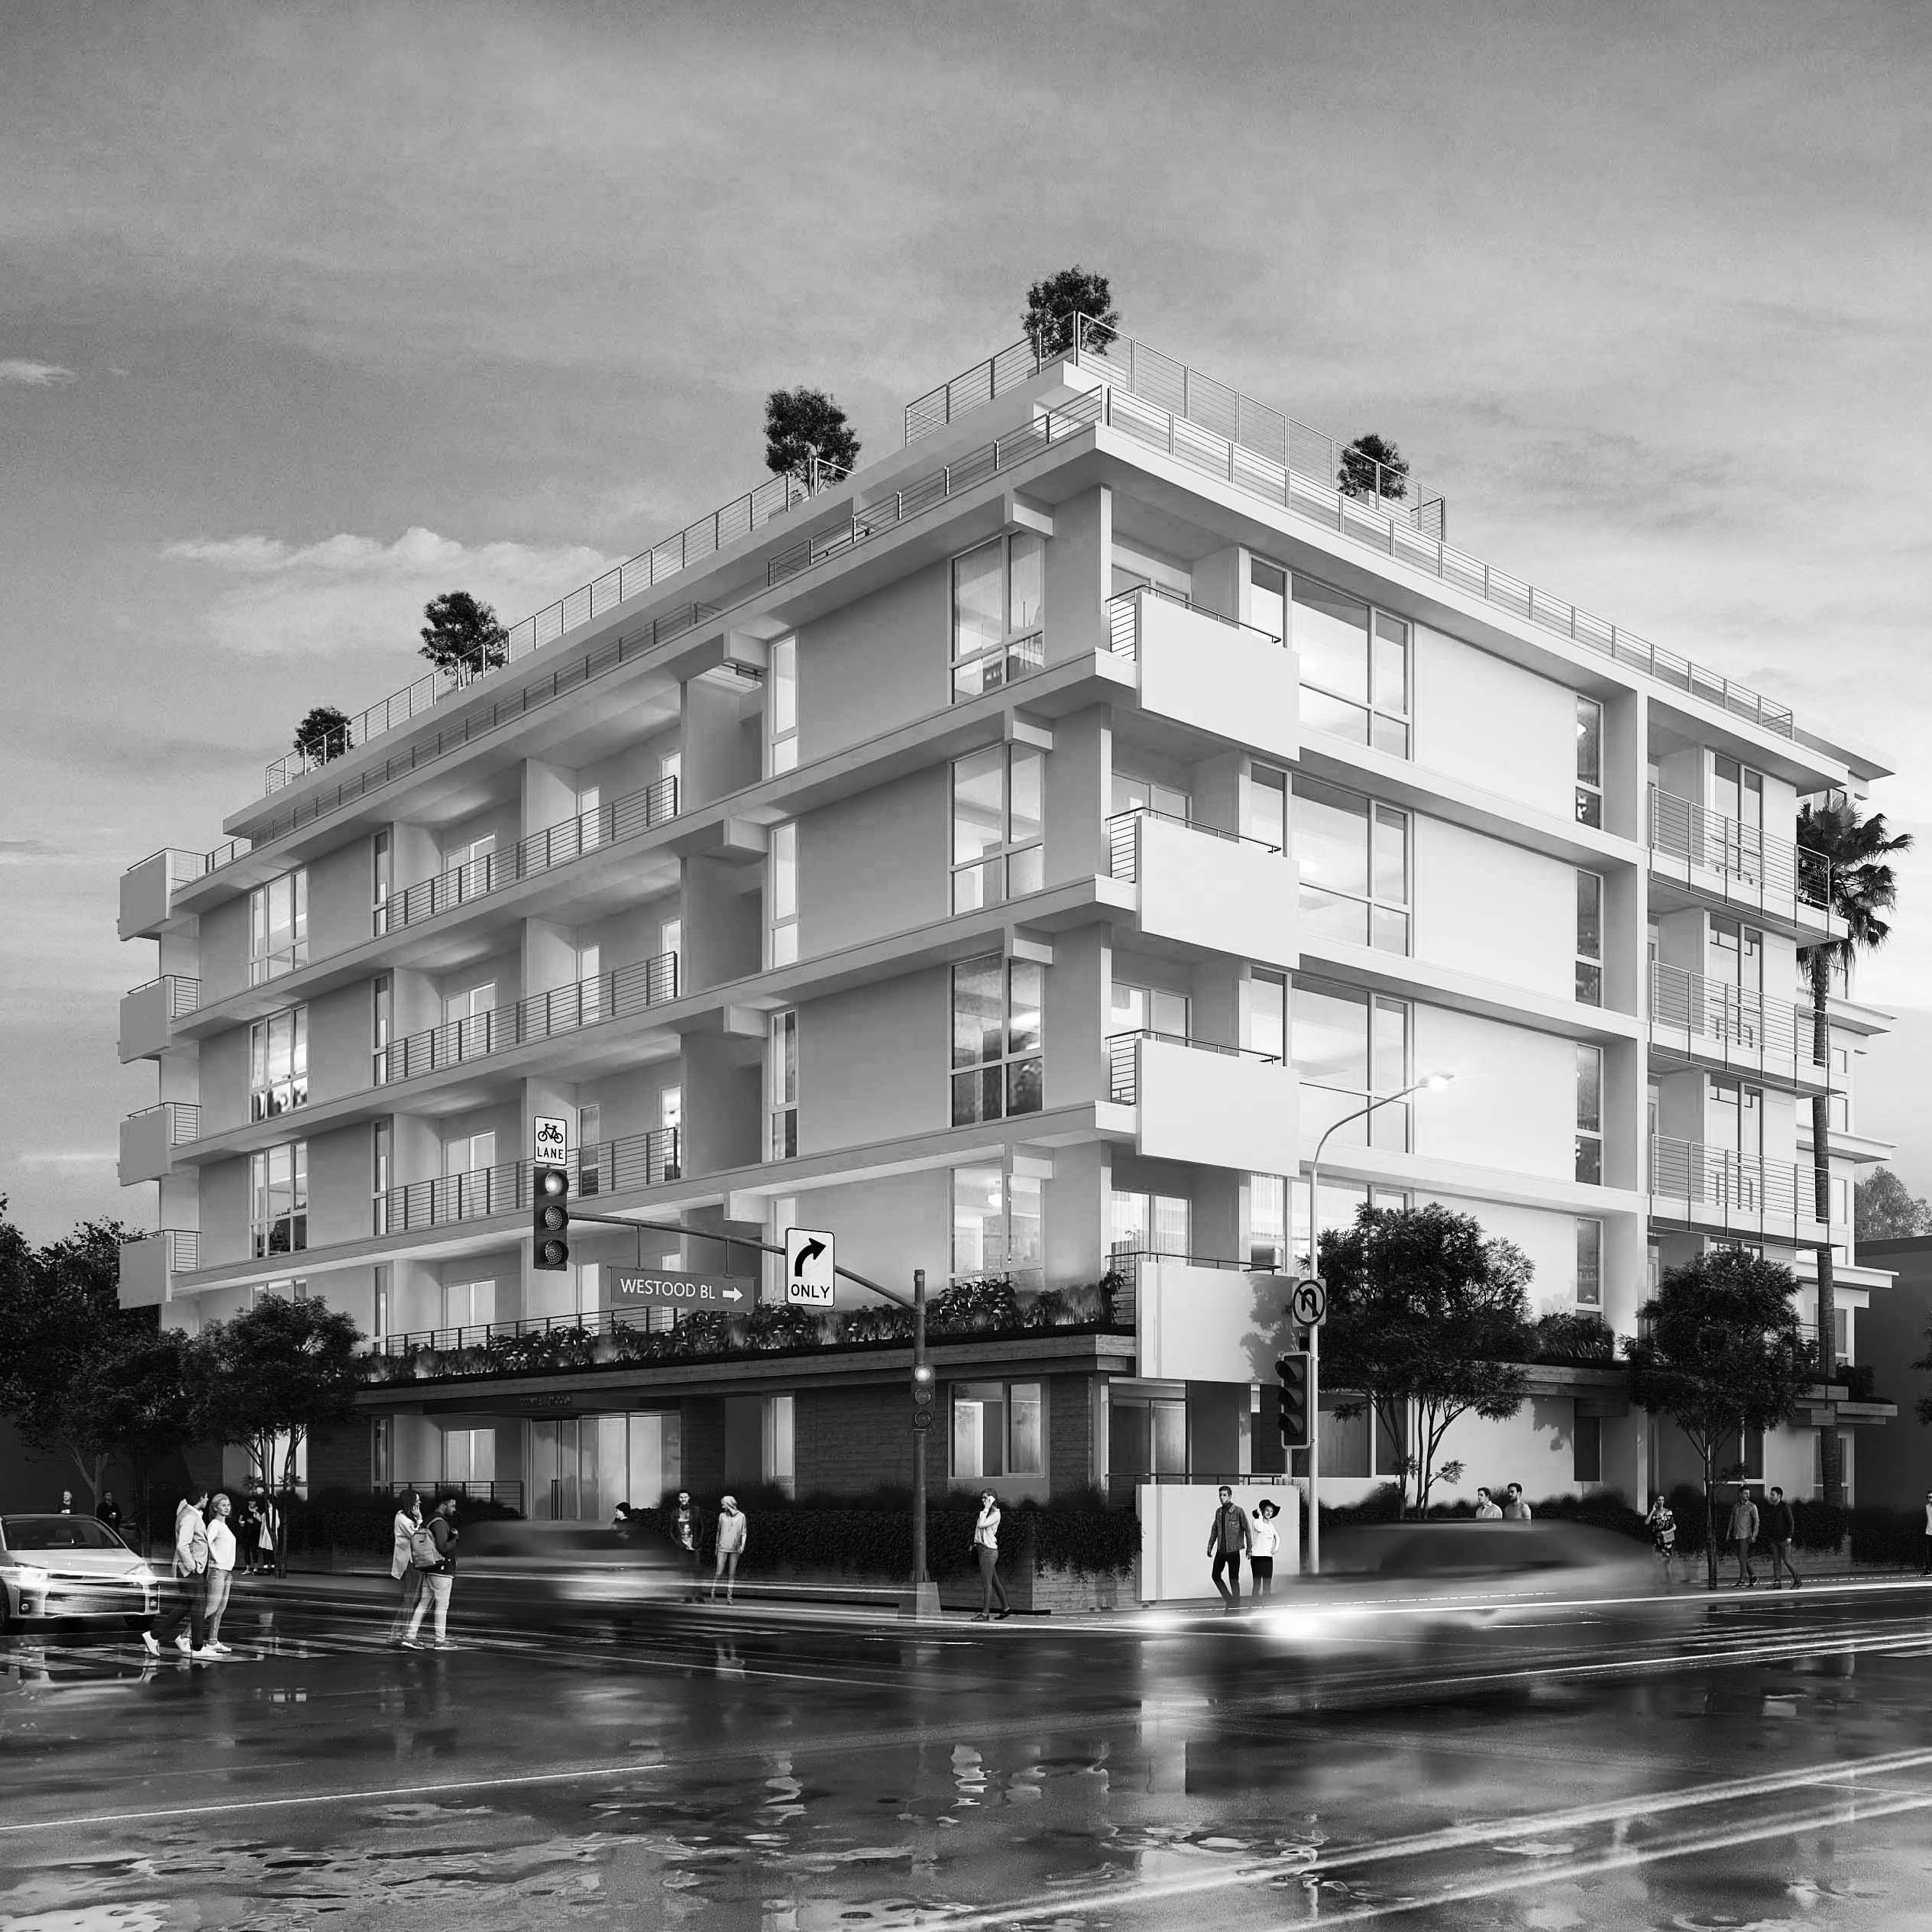 Boutique, Hotels, Office Buildings, Multifamily Residential Projects by Marcello Pozzi Architects